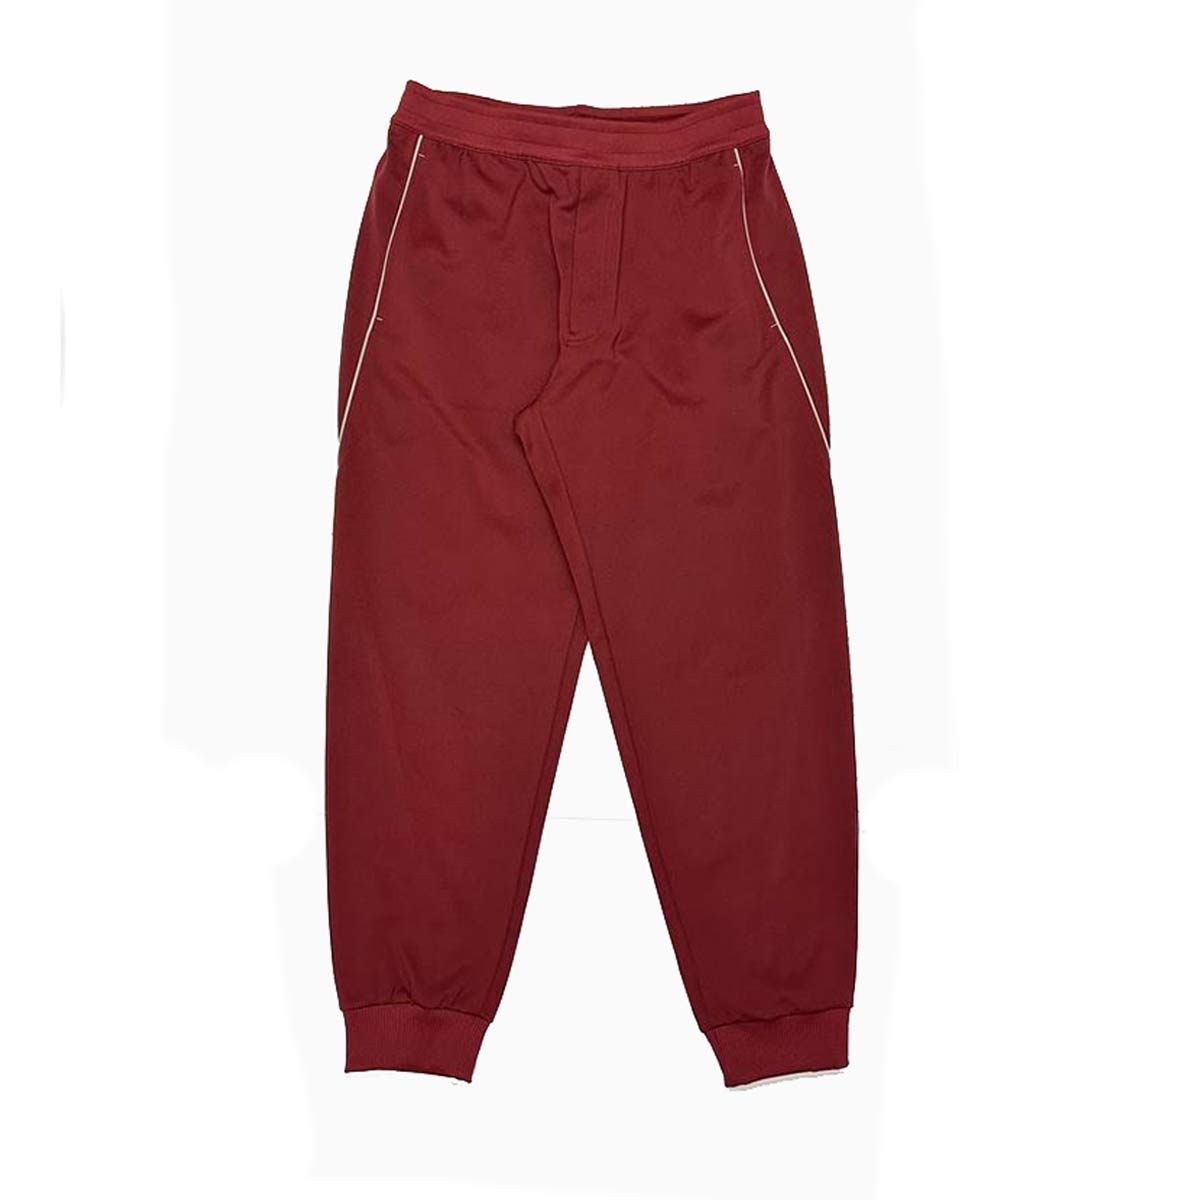 Y3 Superstar Shared  Pant